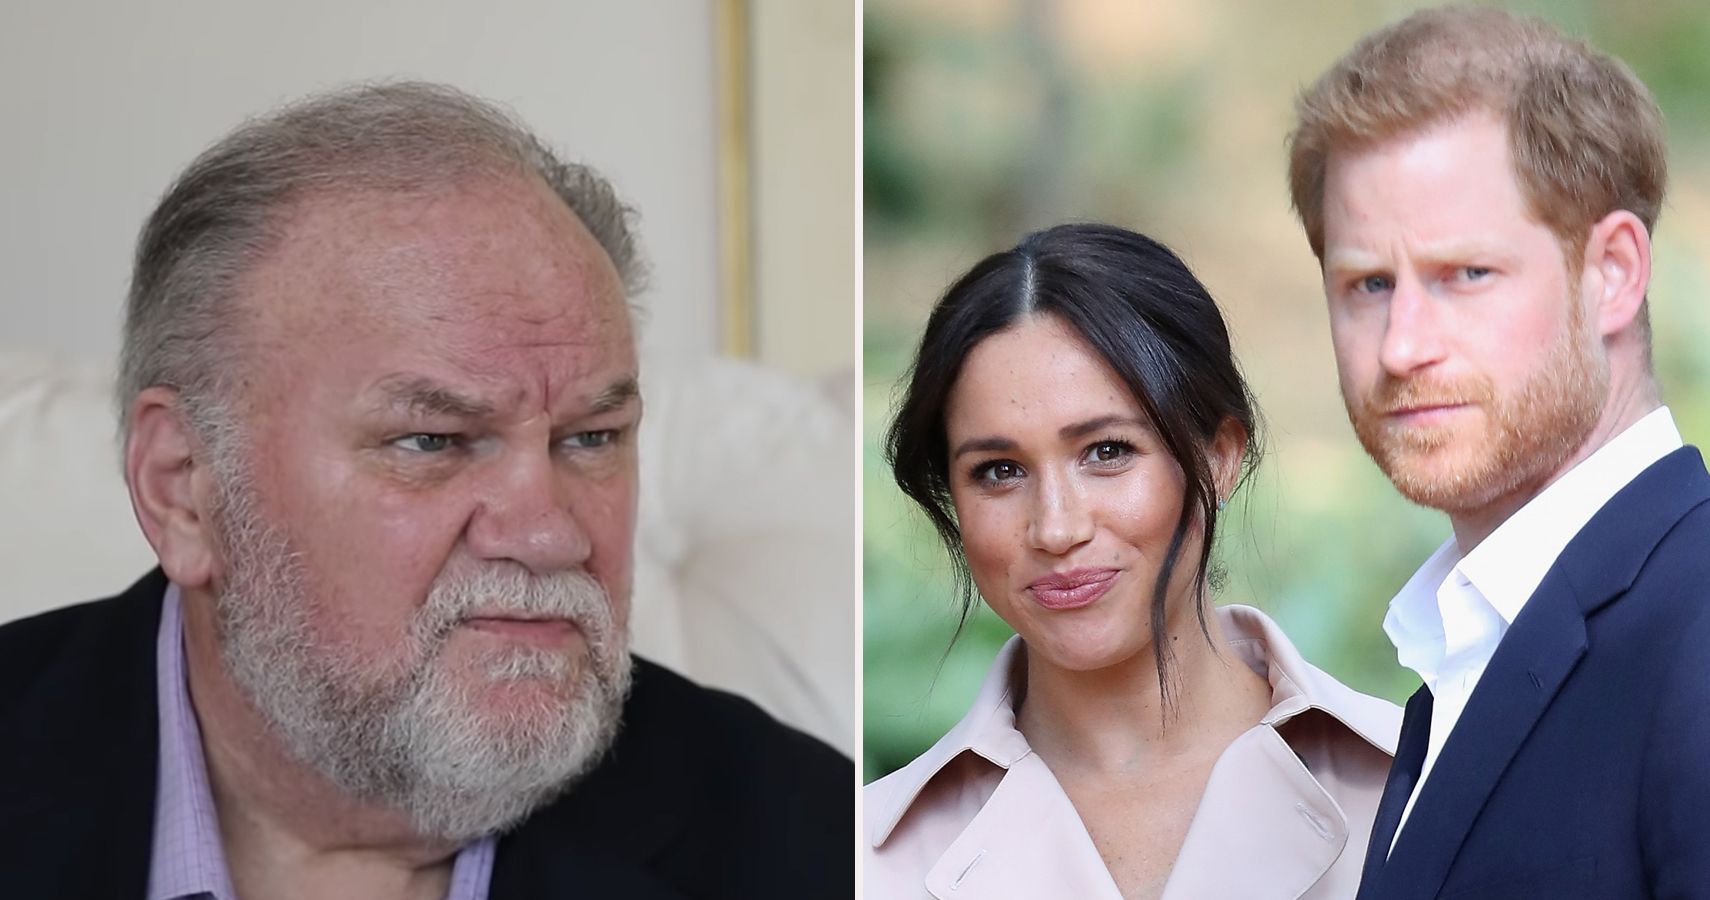 Prince Williams Said He Has No Choice As Meghan Markle's Dad Is Embarrased